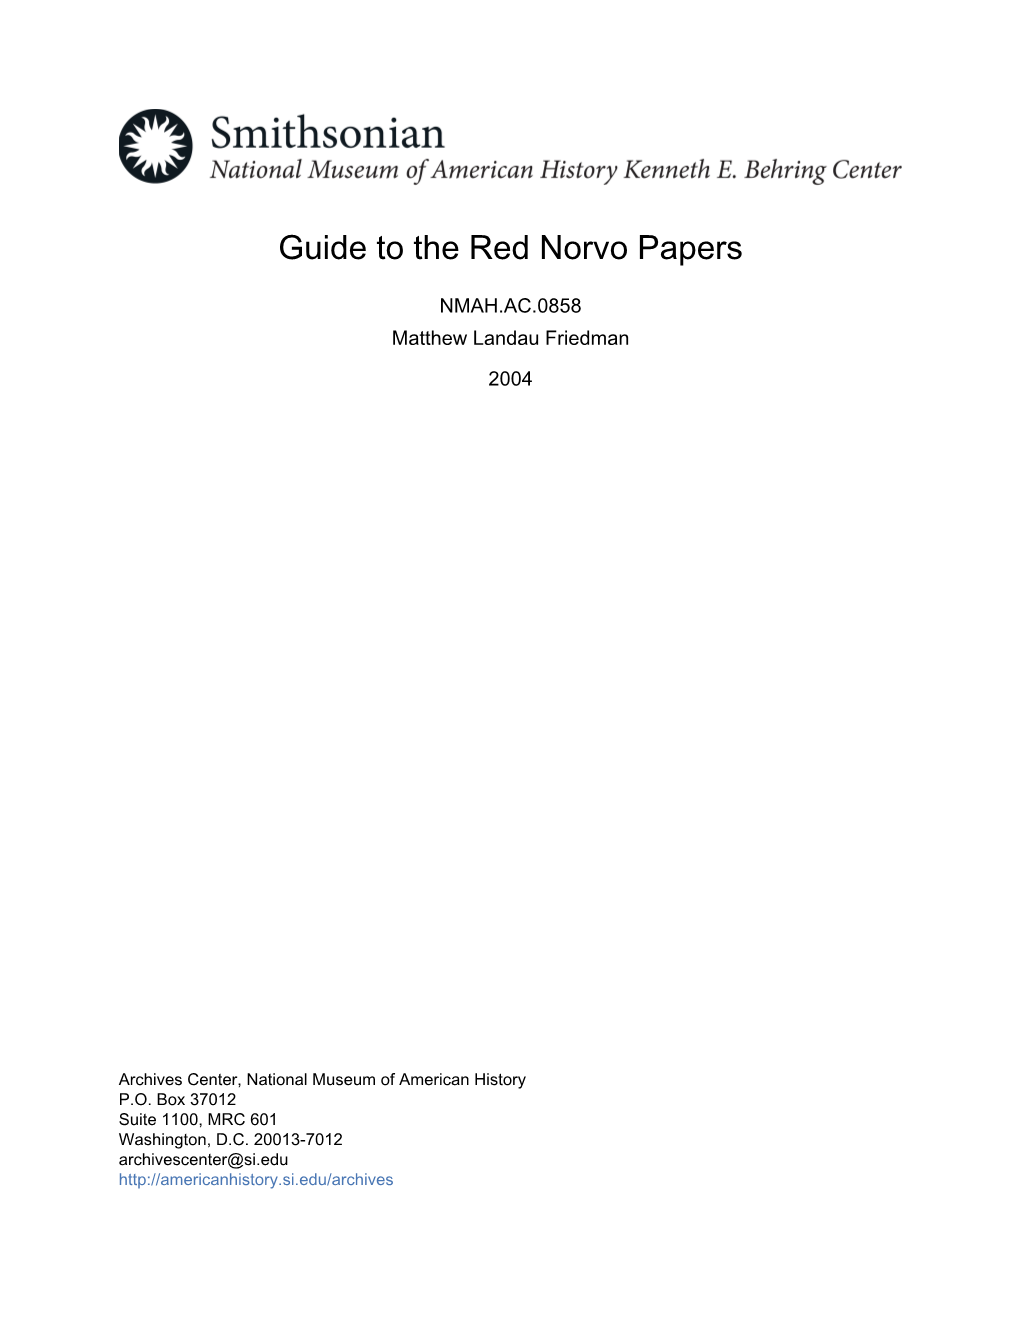 Guide to the Red Norvo Papers